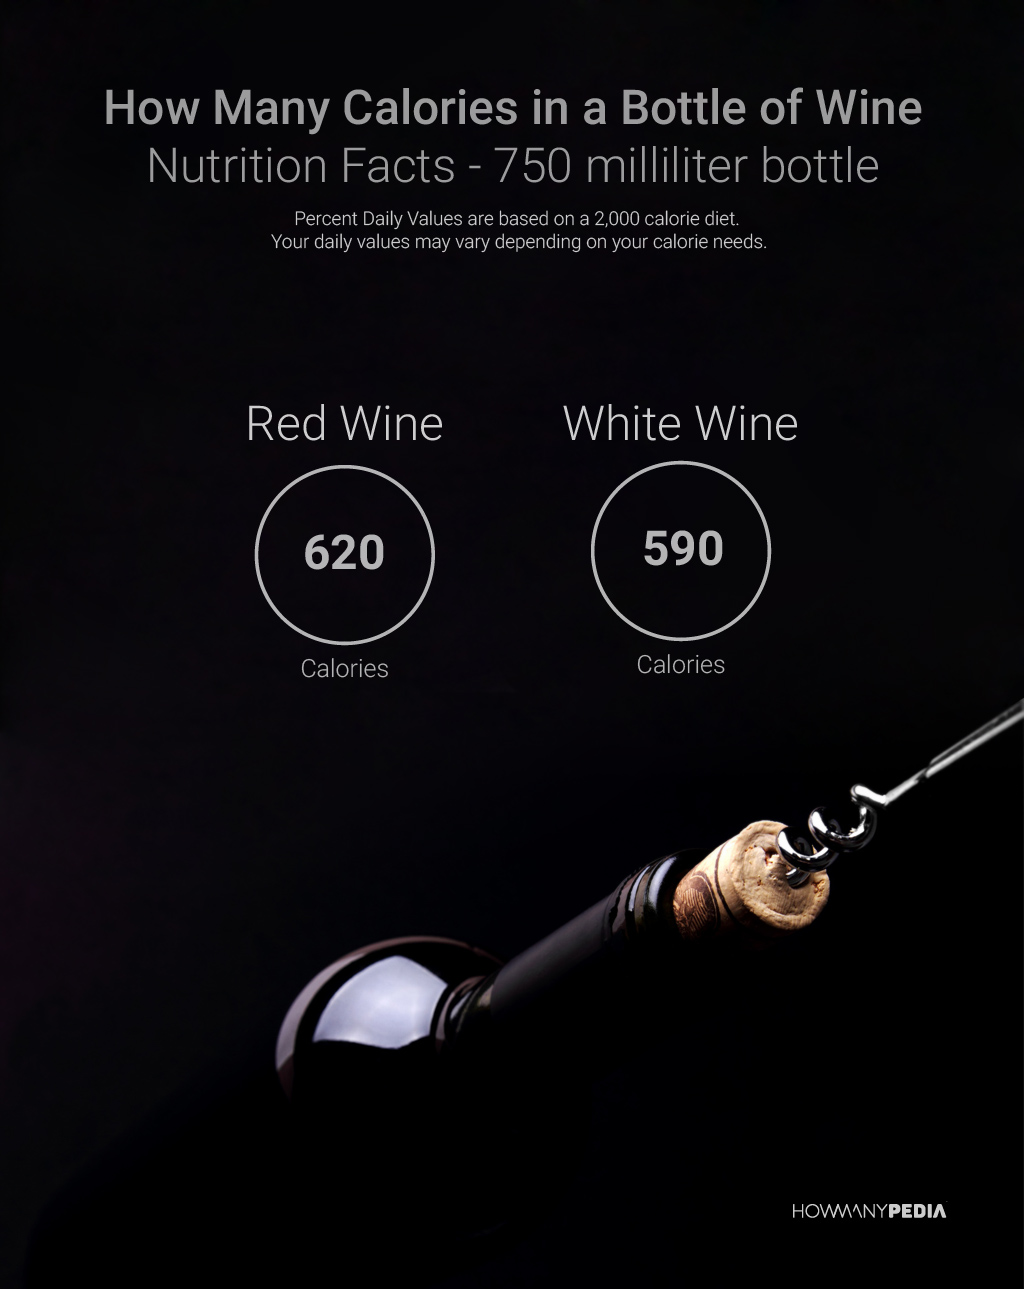 How Many Calories in a Bottle of Wine